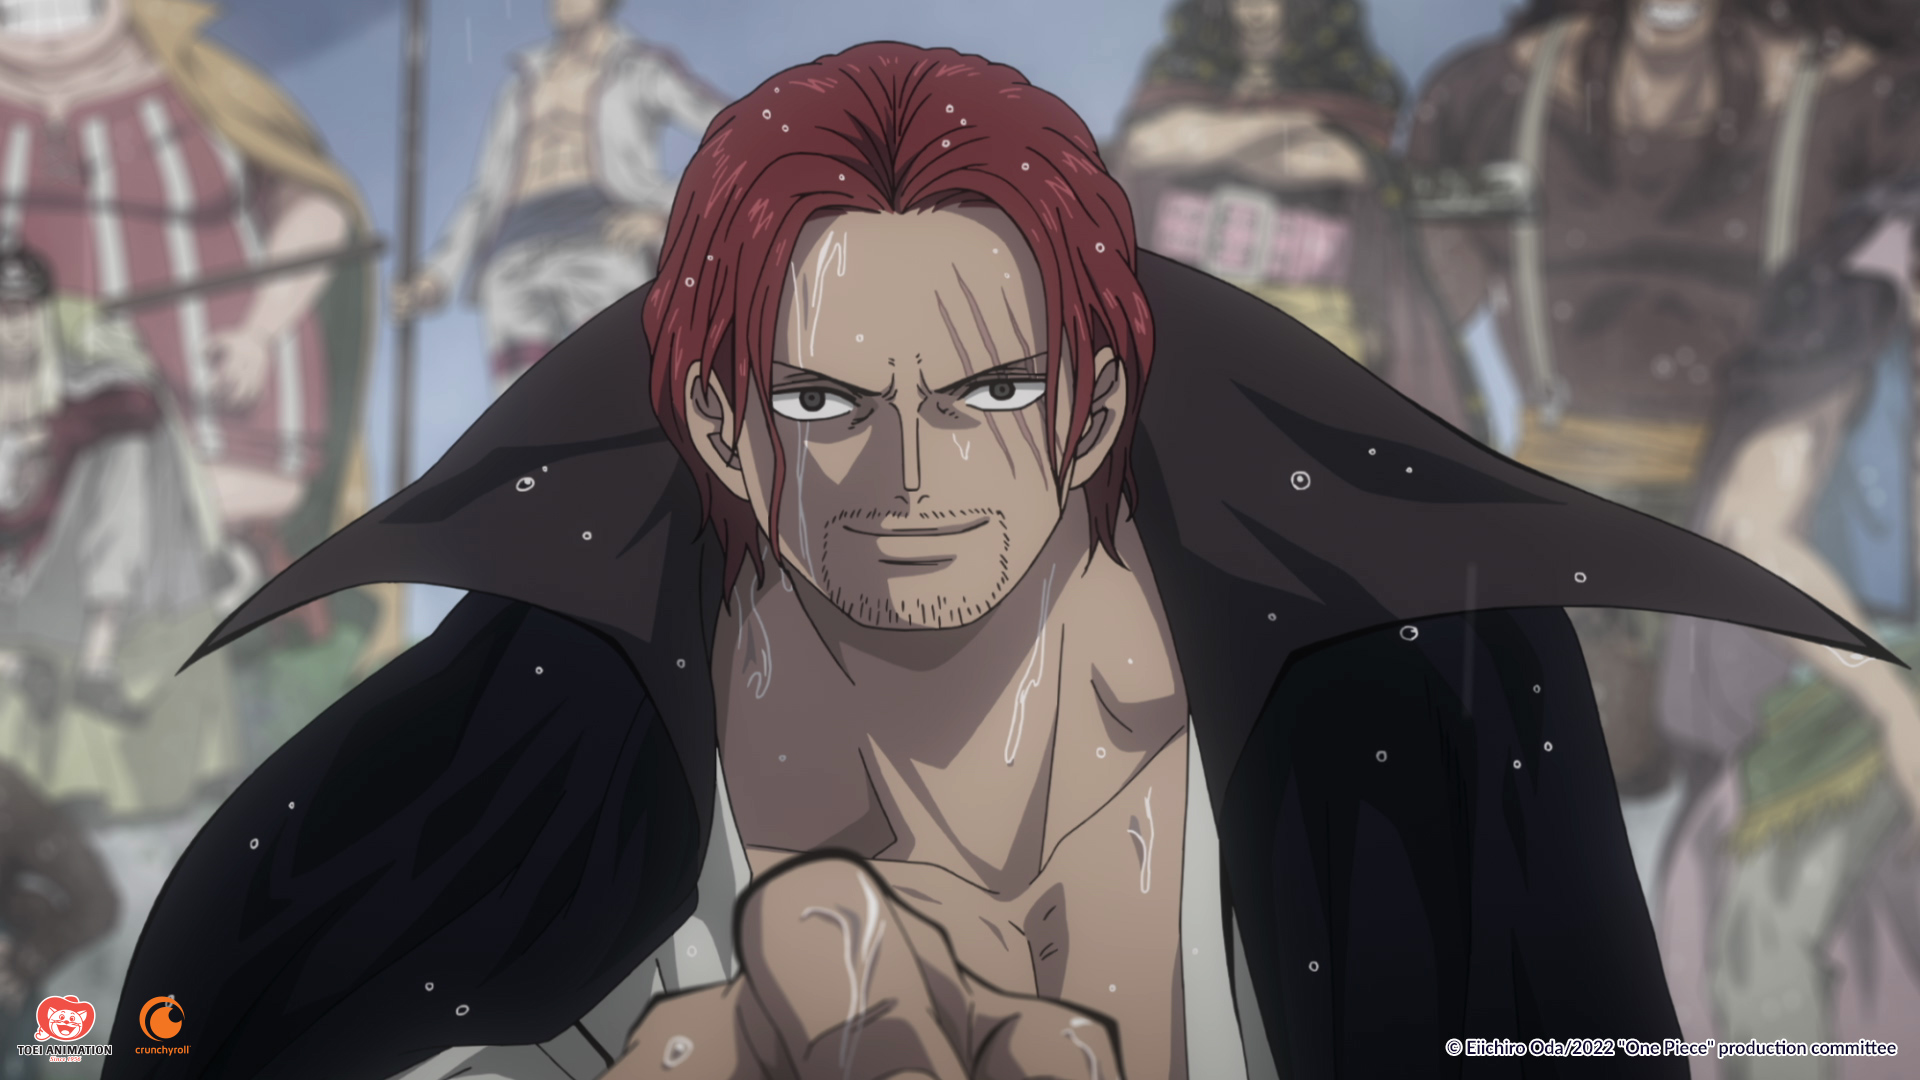 One Piece on X: One Piece Season 13 Voyage 9 (eps 879-891) is now